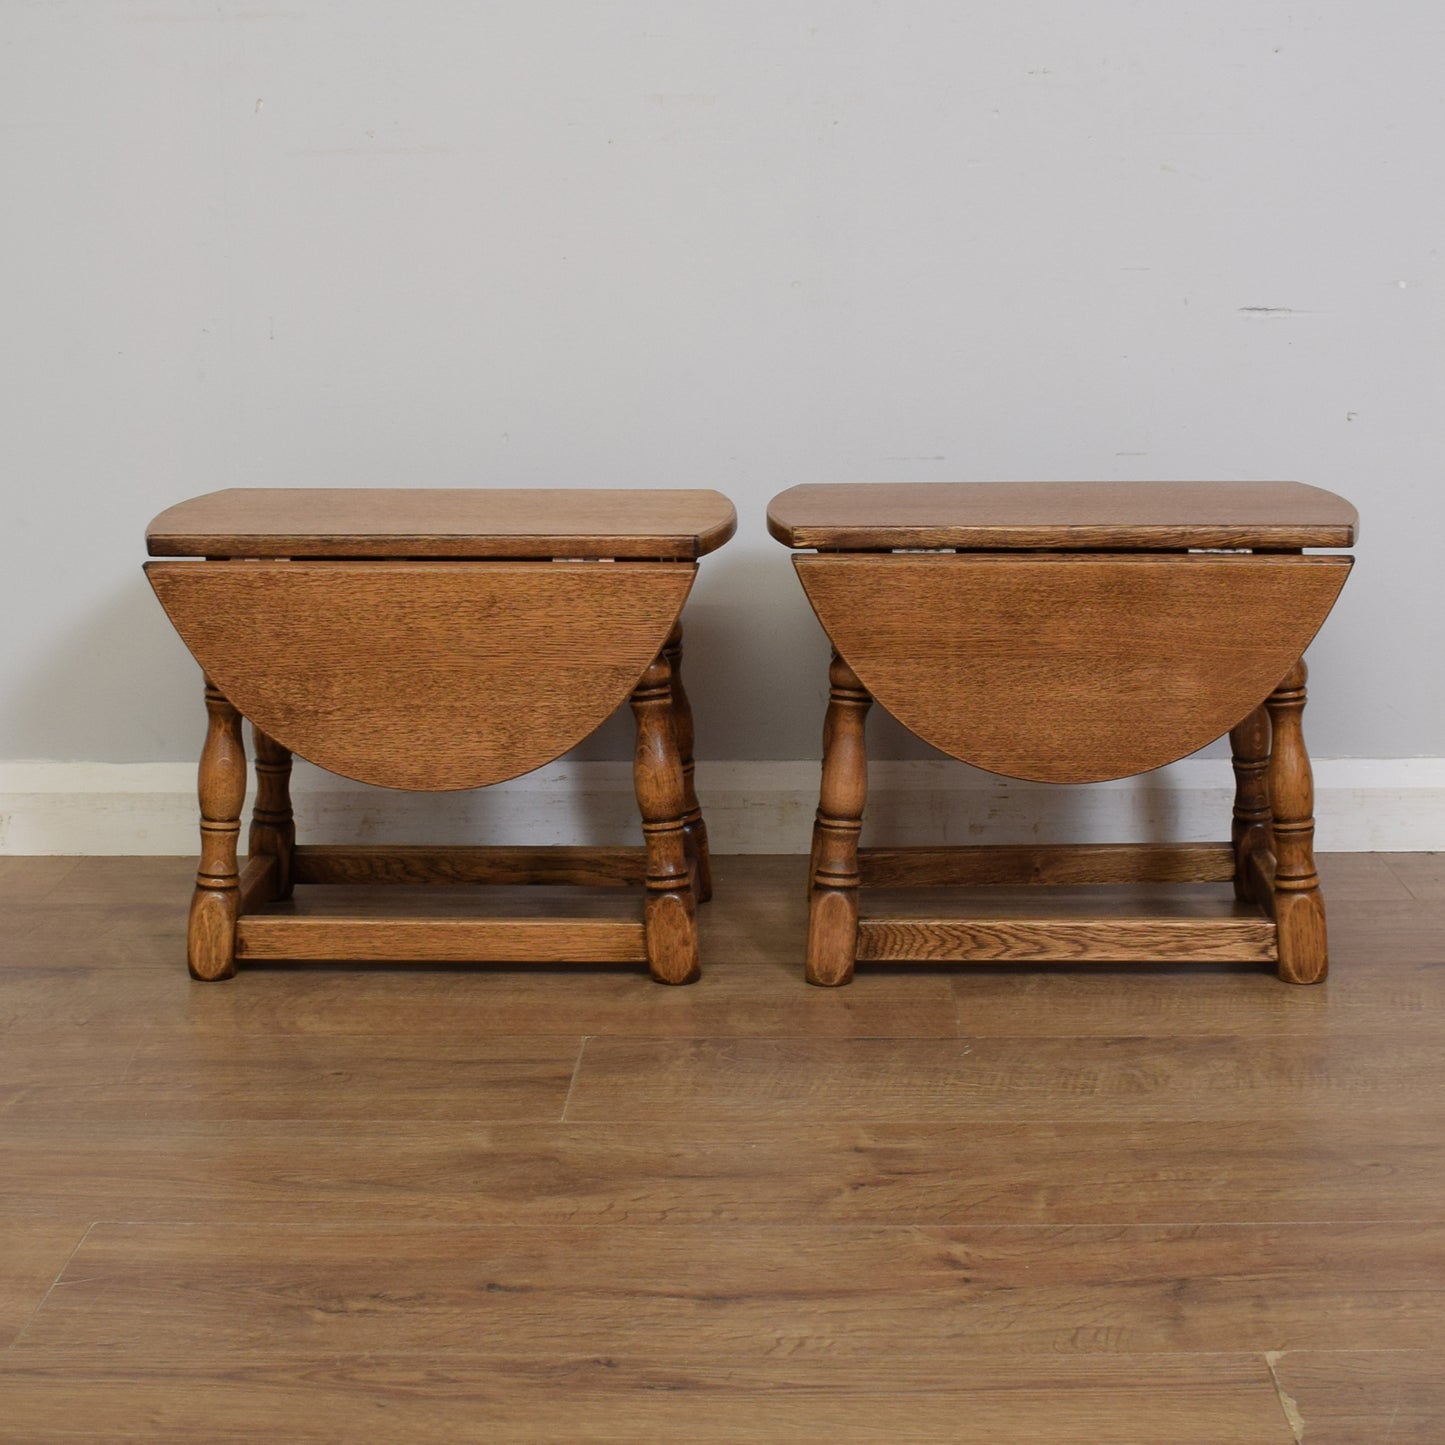 Pair Of Small Drop Leaf Tables